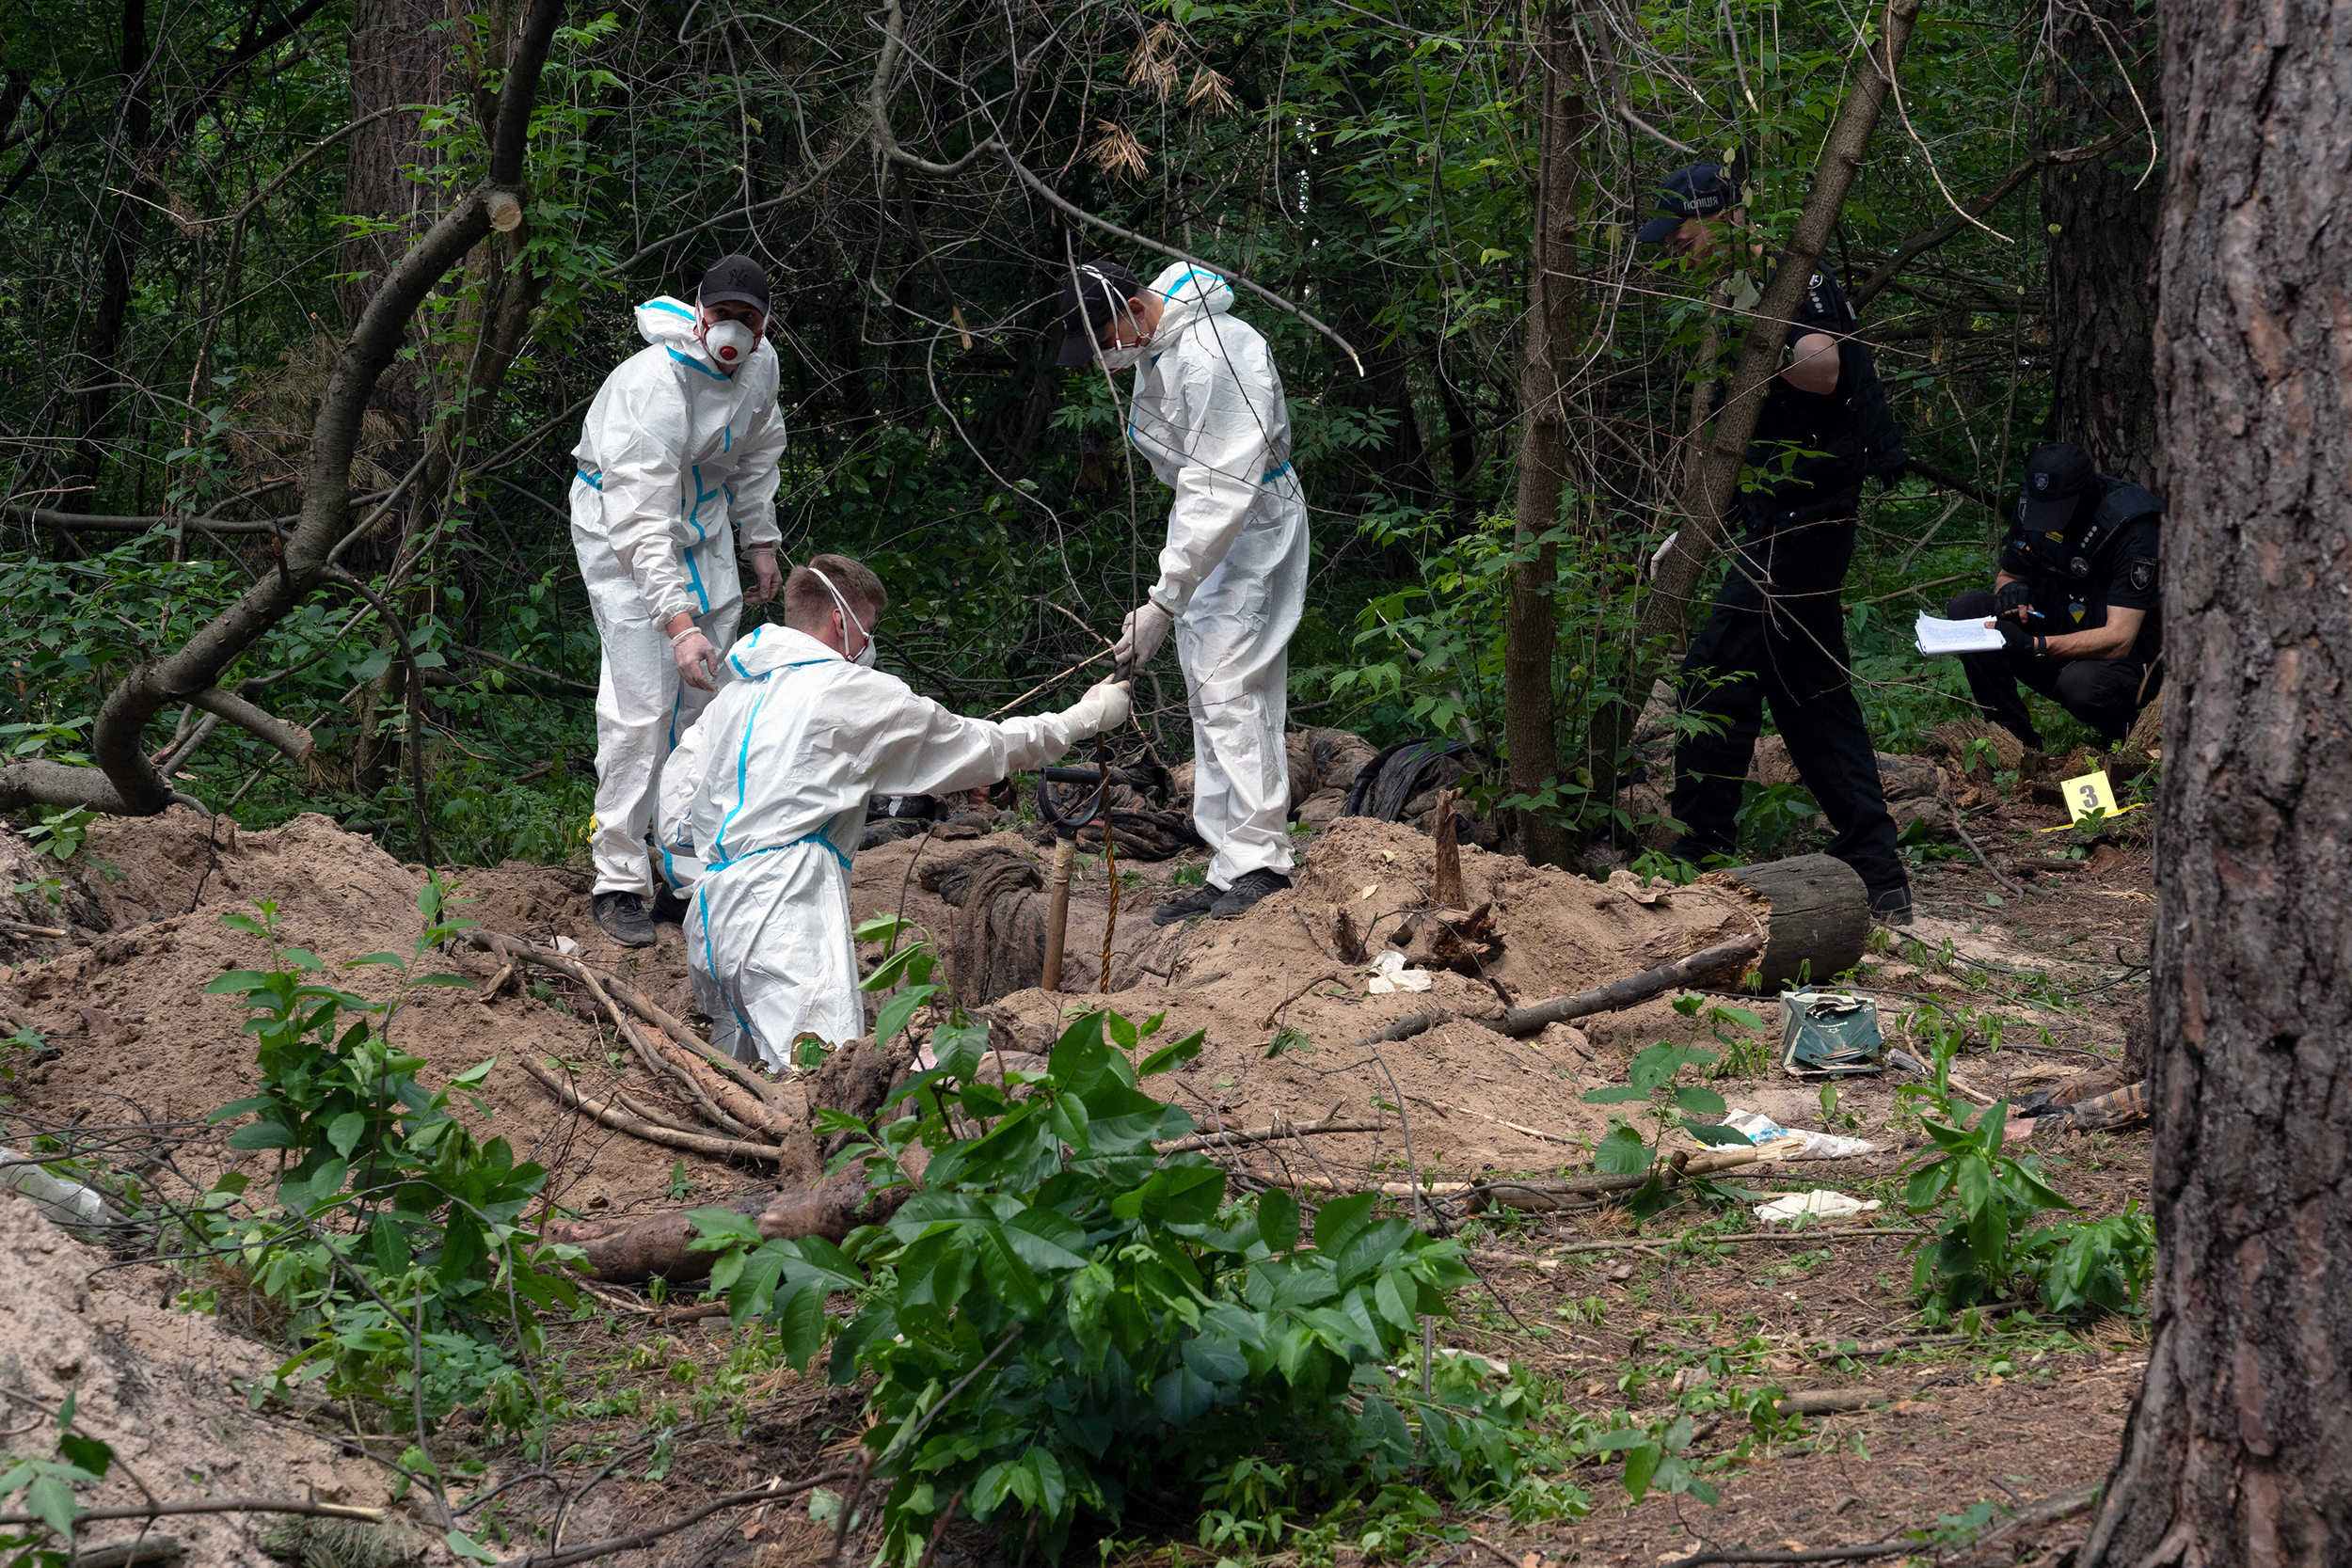 The bodies of civilians killed by russian soldiers were found near the village of Myrotske in Bucha, Ukraine on June 13.